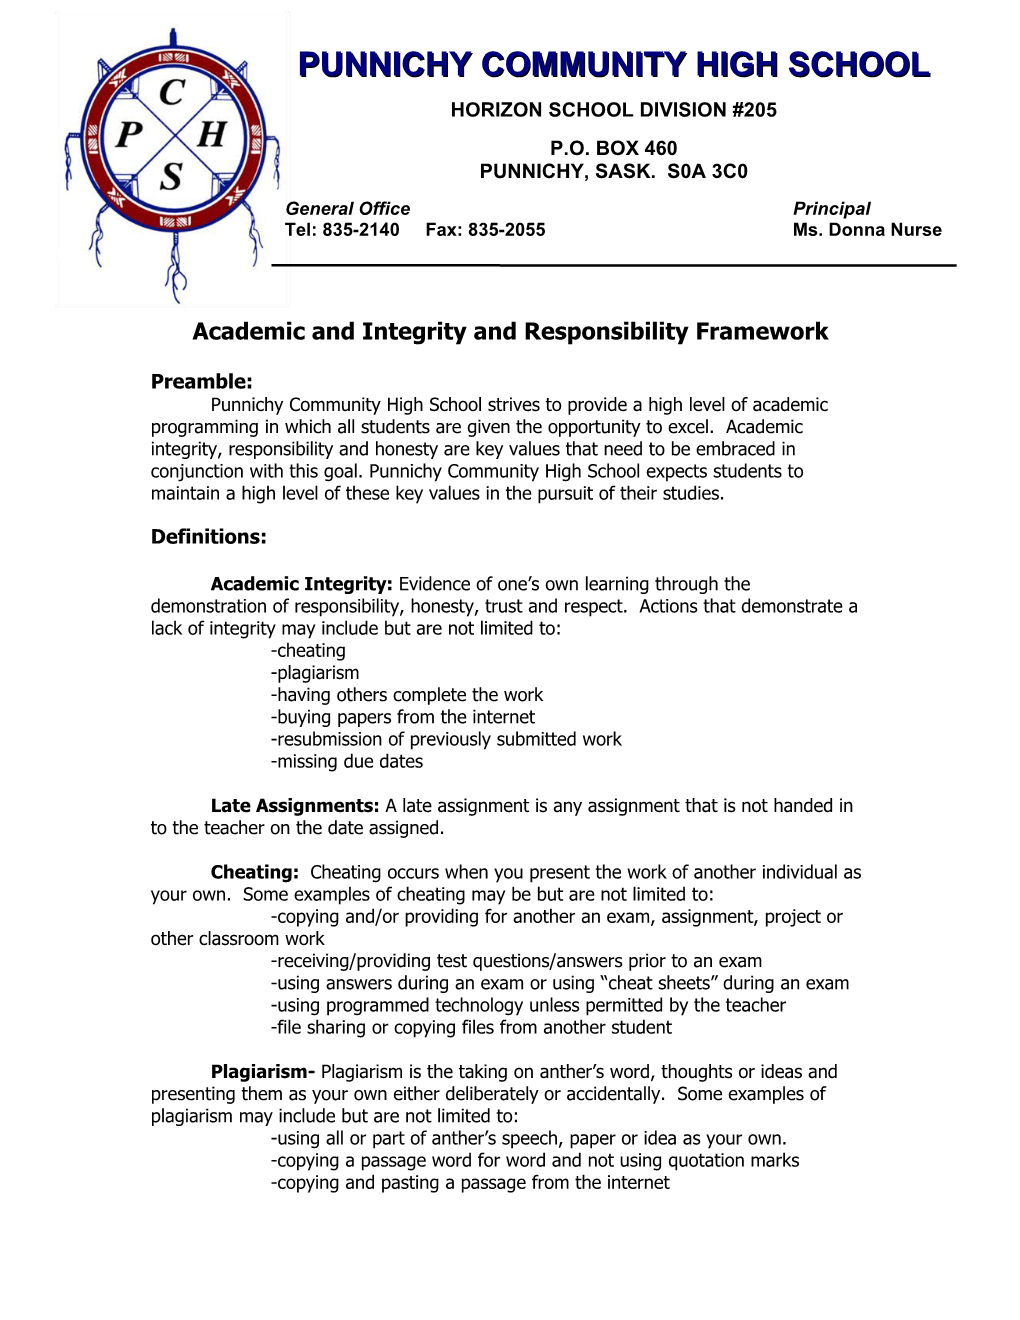 2017-2018 Academic Integrity and Responsibility and Framework